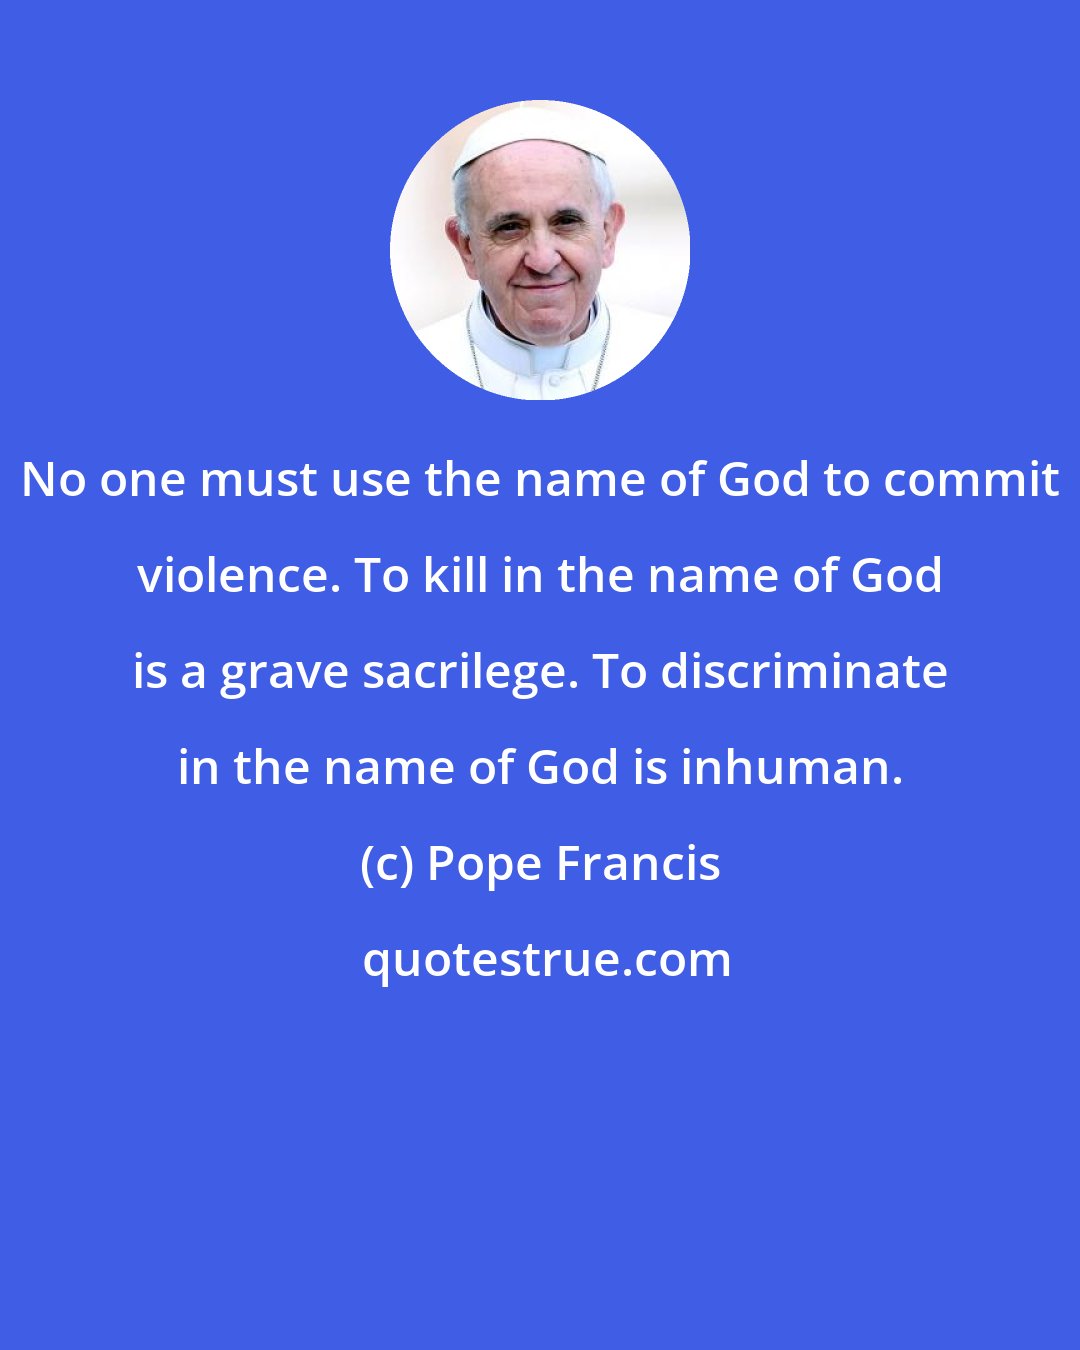 Pope Francis: No one must use the name of God to commit violence. To kill in the name of God is a grave sacrilege. To discriminate in the name of God is inhuman.